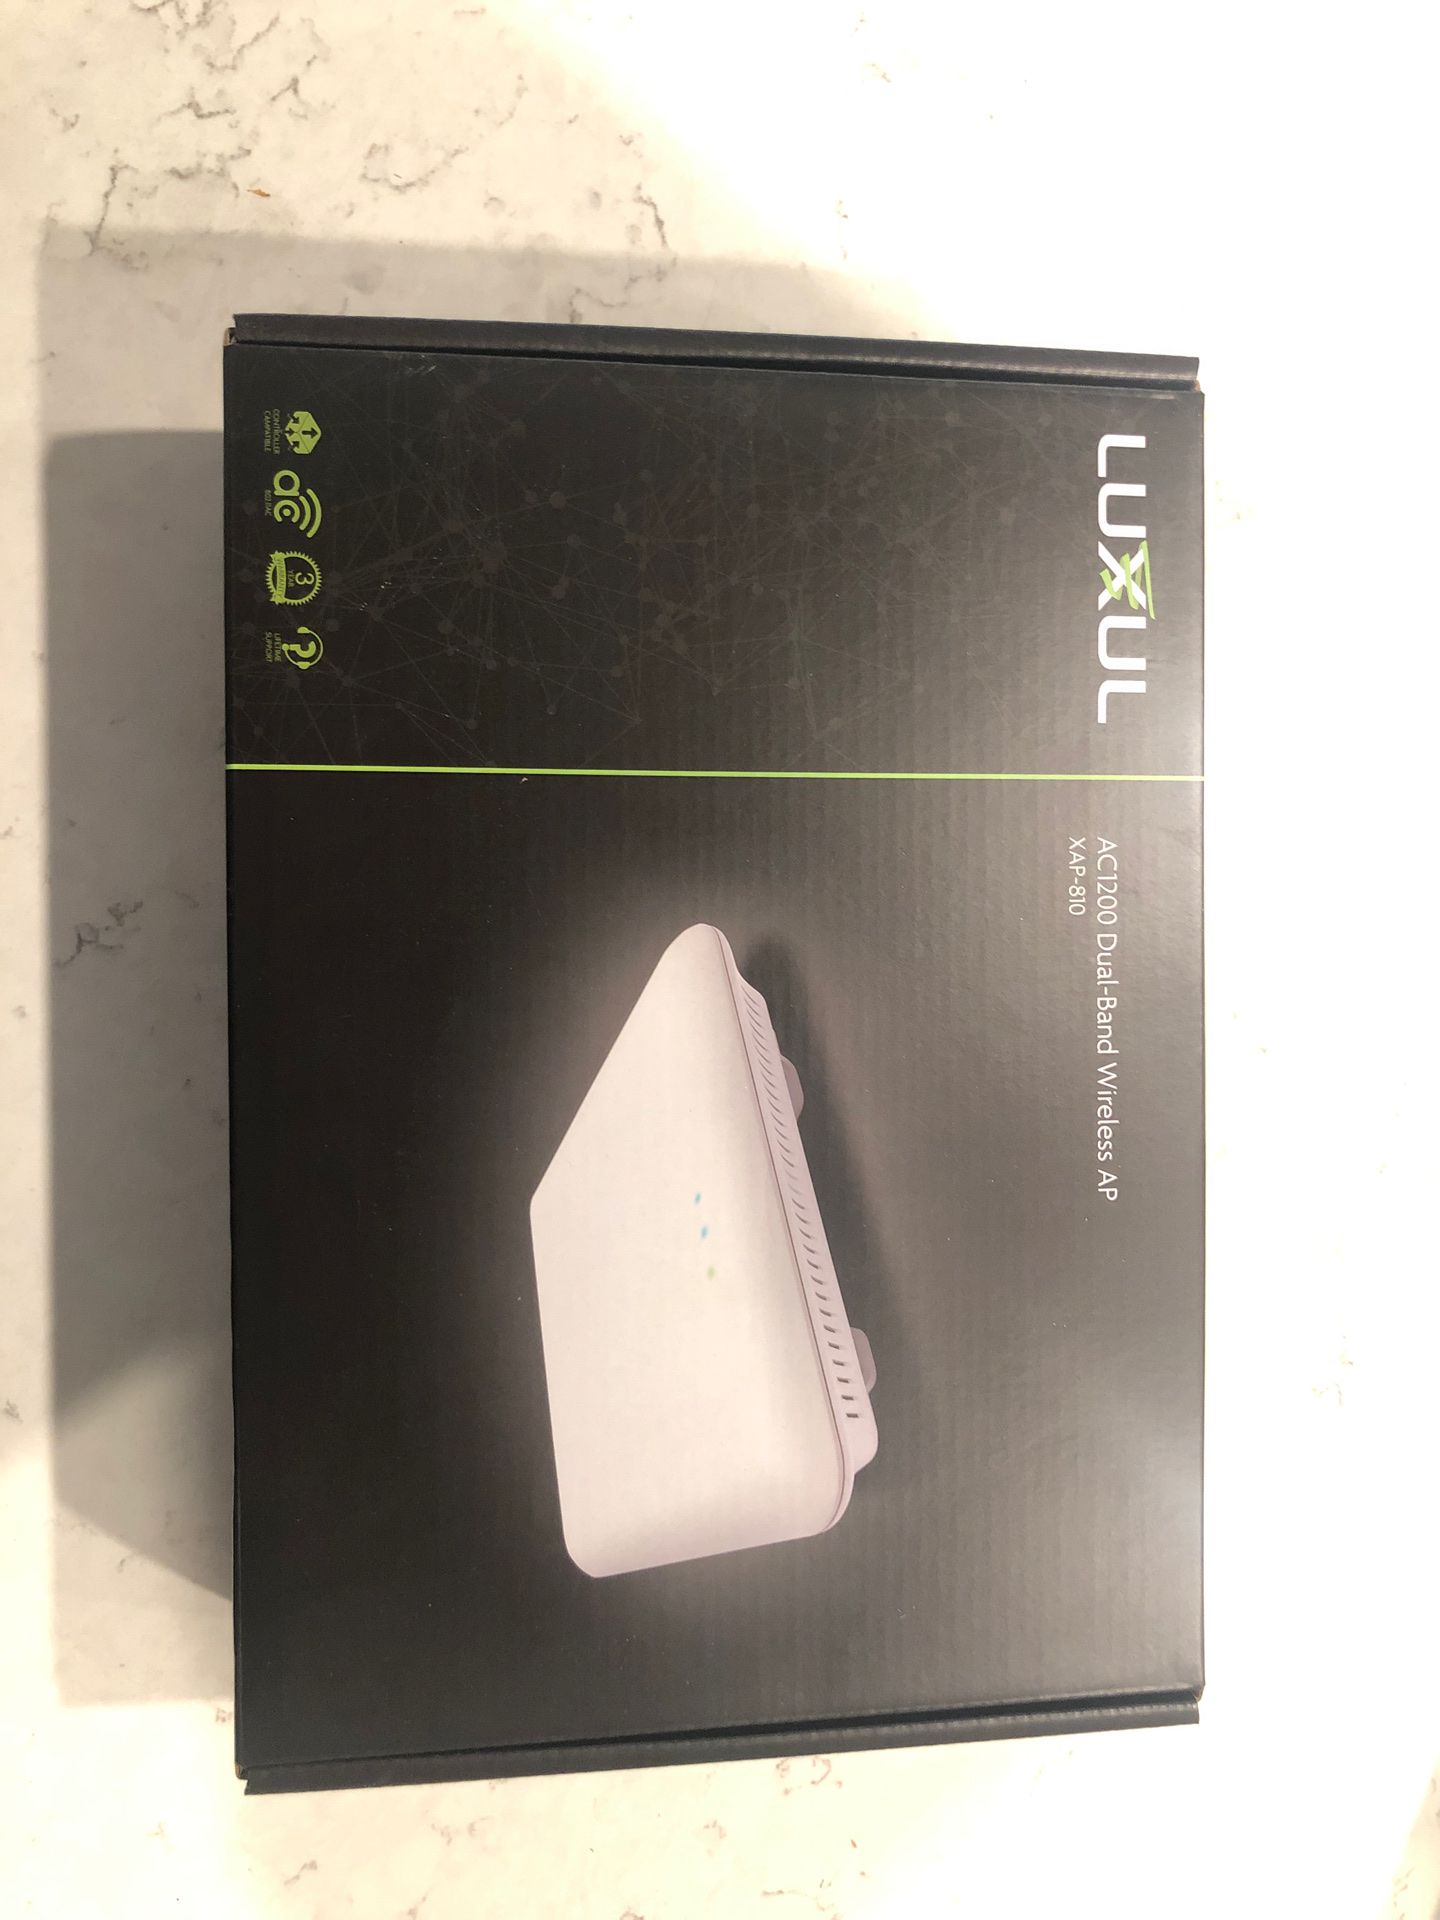 LUXUL Dual-Band Wireless Access Point XAP-810